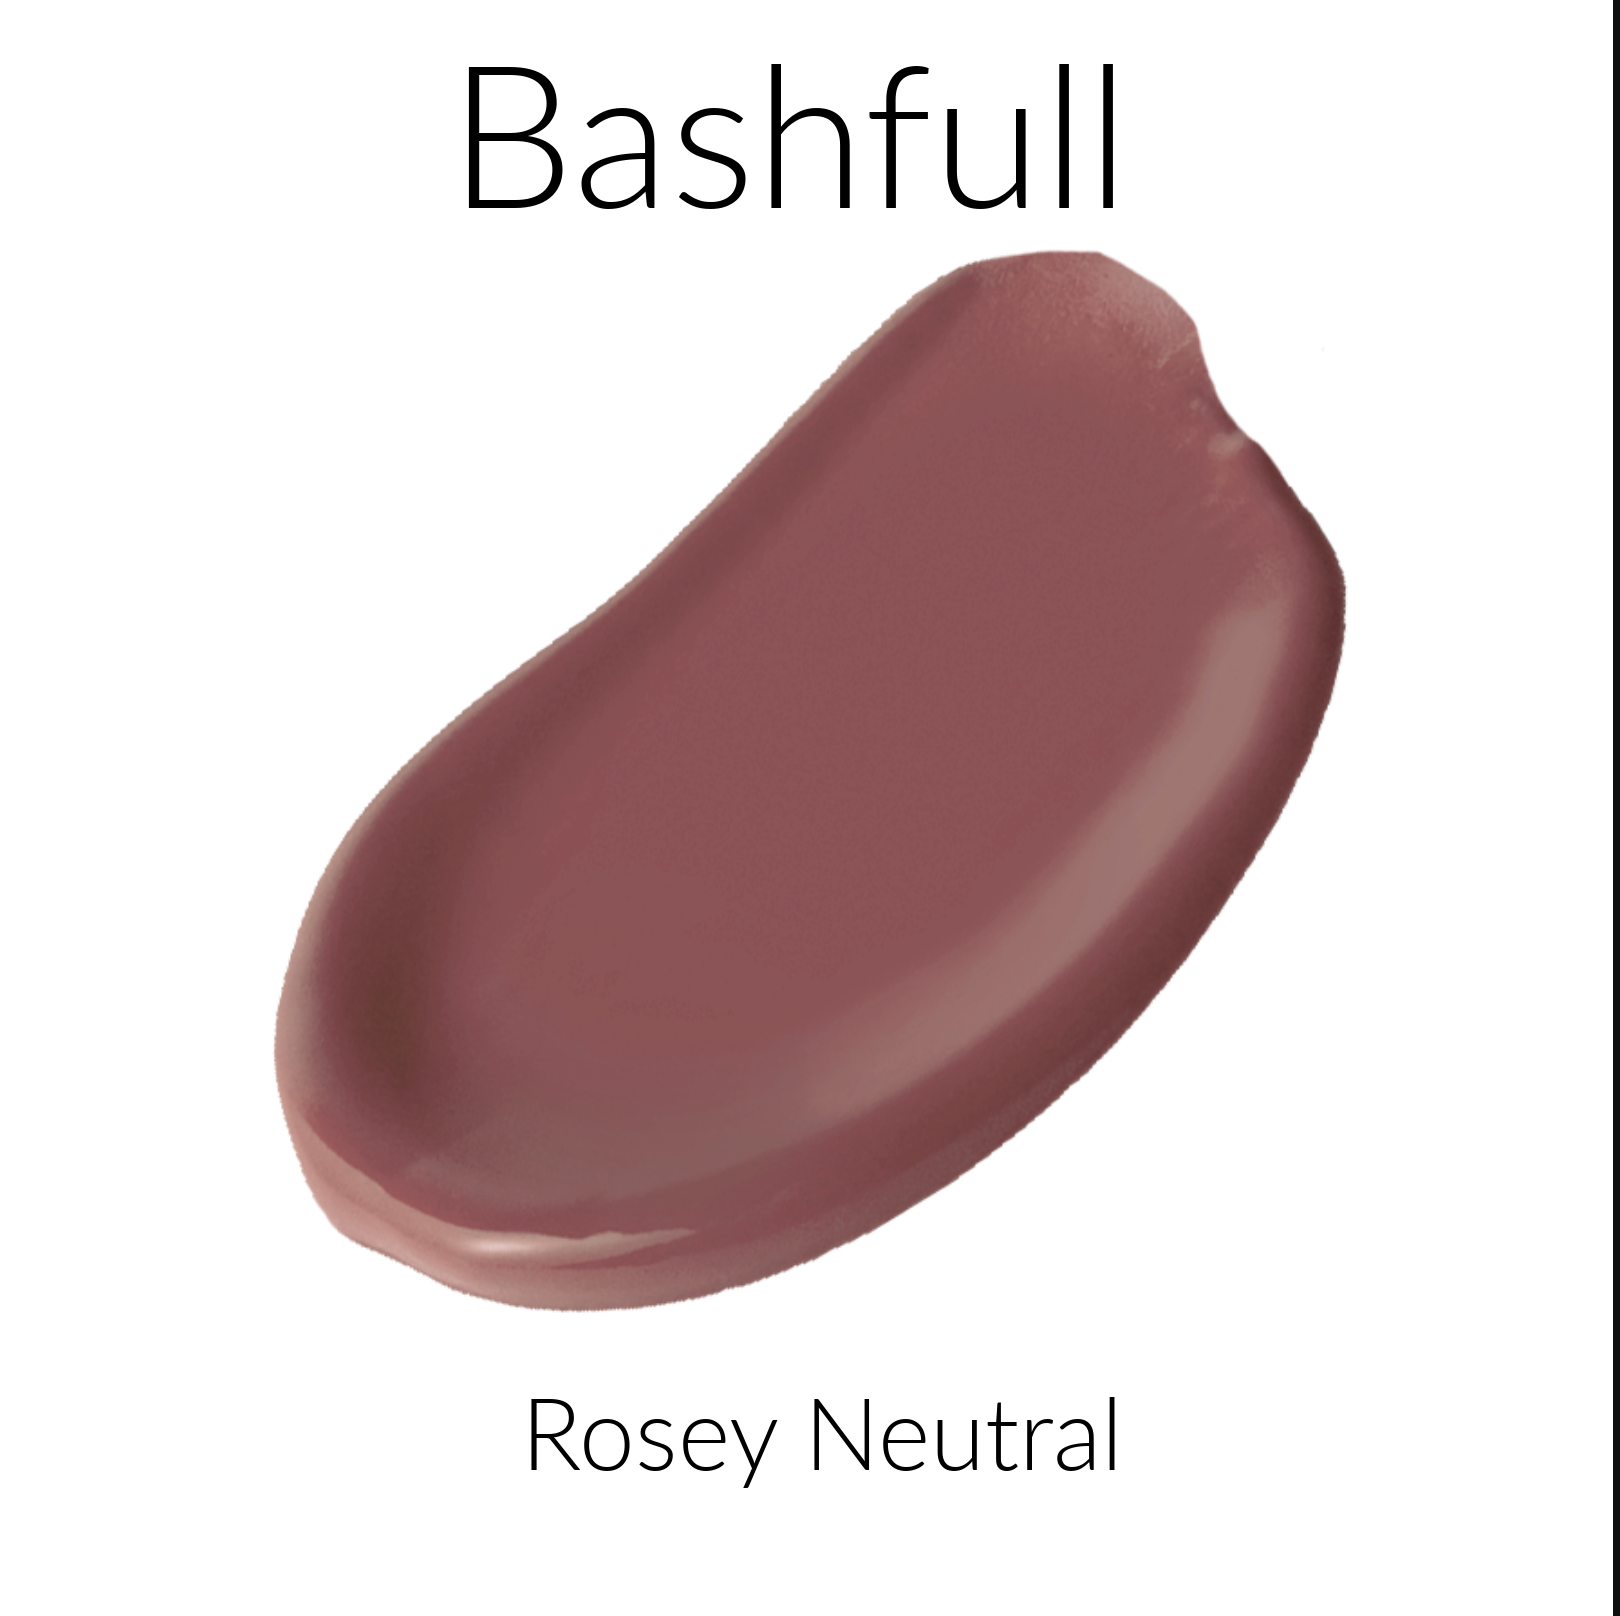 Bashfull Rosey Neutral Nude All Nighter Liquid Lipstick Color Swatch